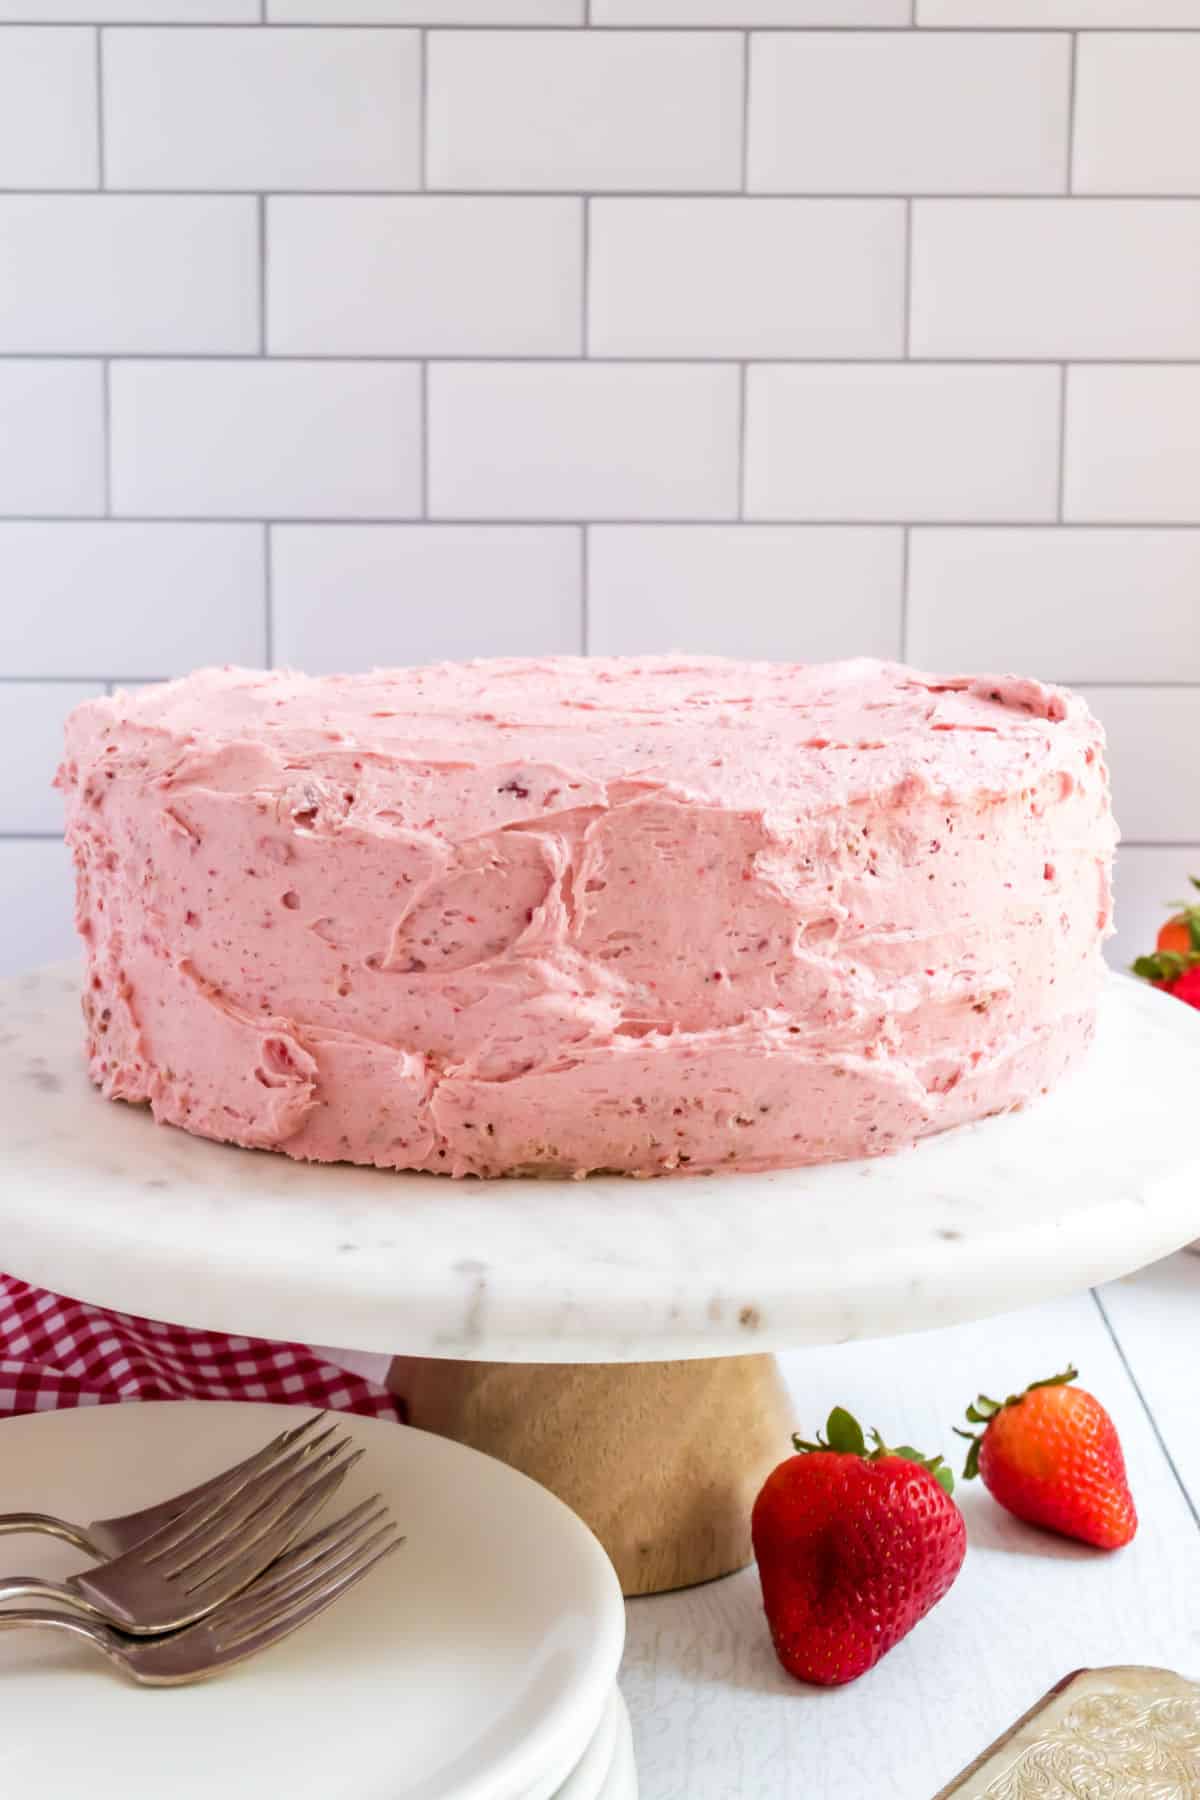 Strawberry frosting on a strawberry layer cake.